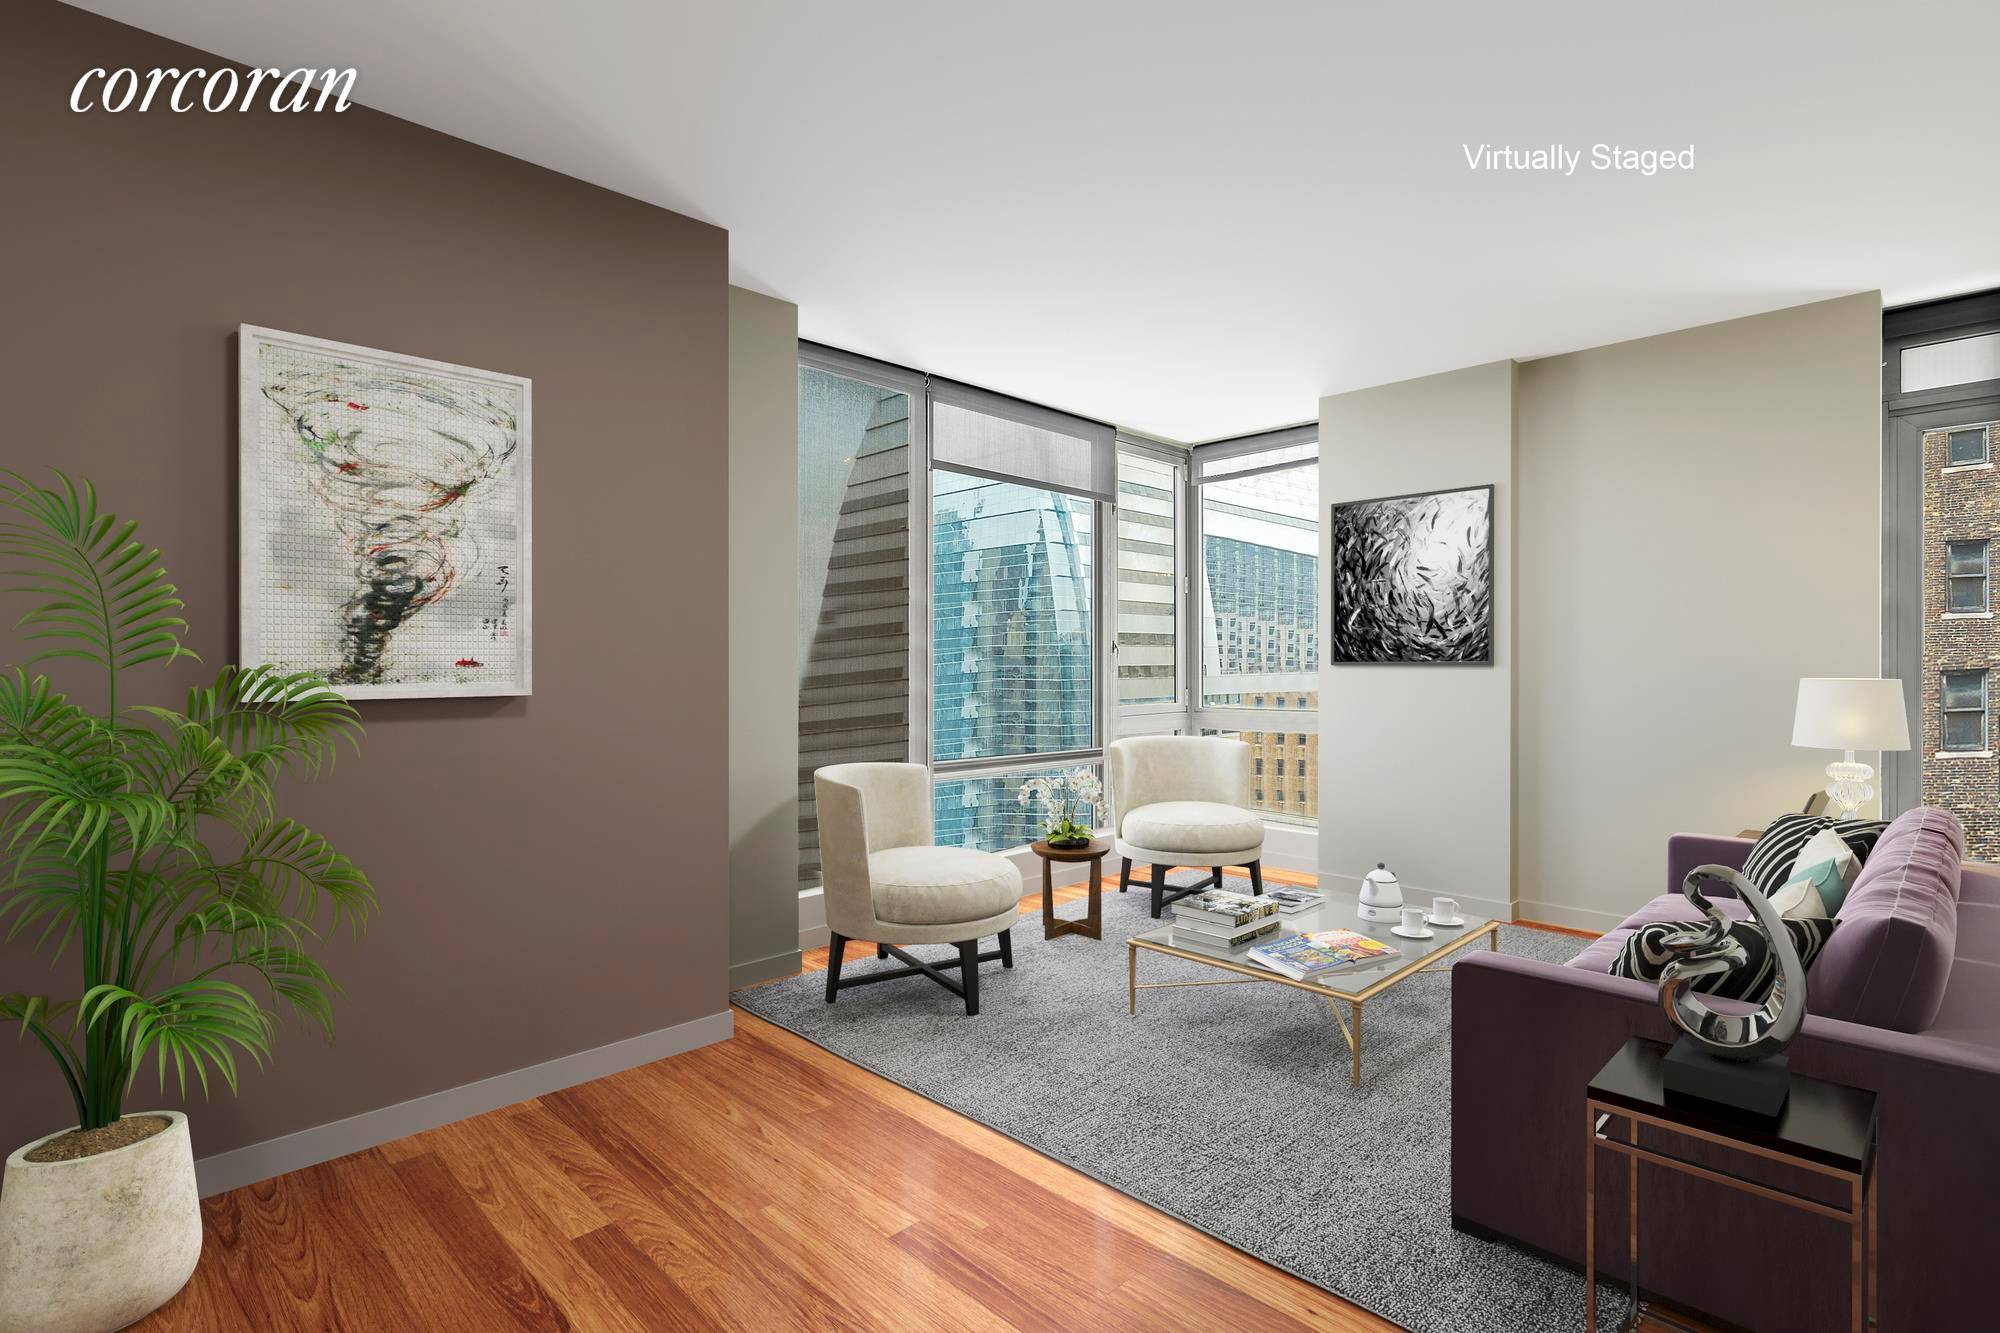 Terrace Apartment ! Enjoy bright, spacious, modern living in this beautiful 2 BED 2 BATH with Private Terrace, corner residence located in the heart of Gramercy.